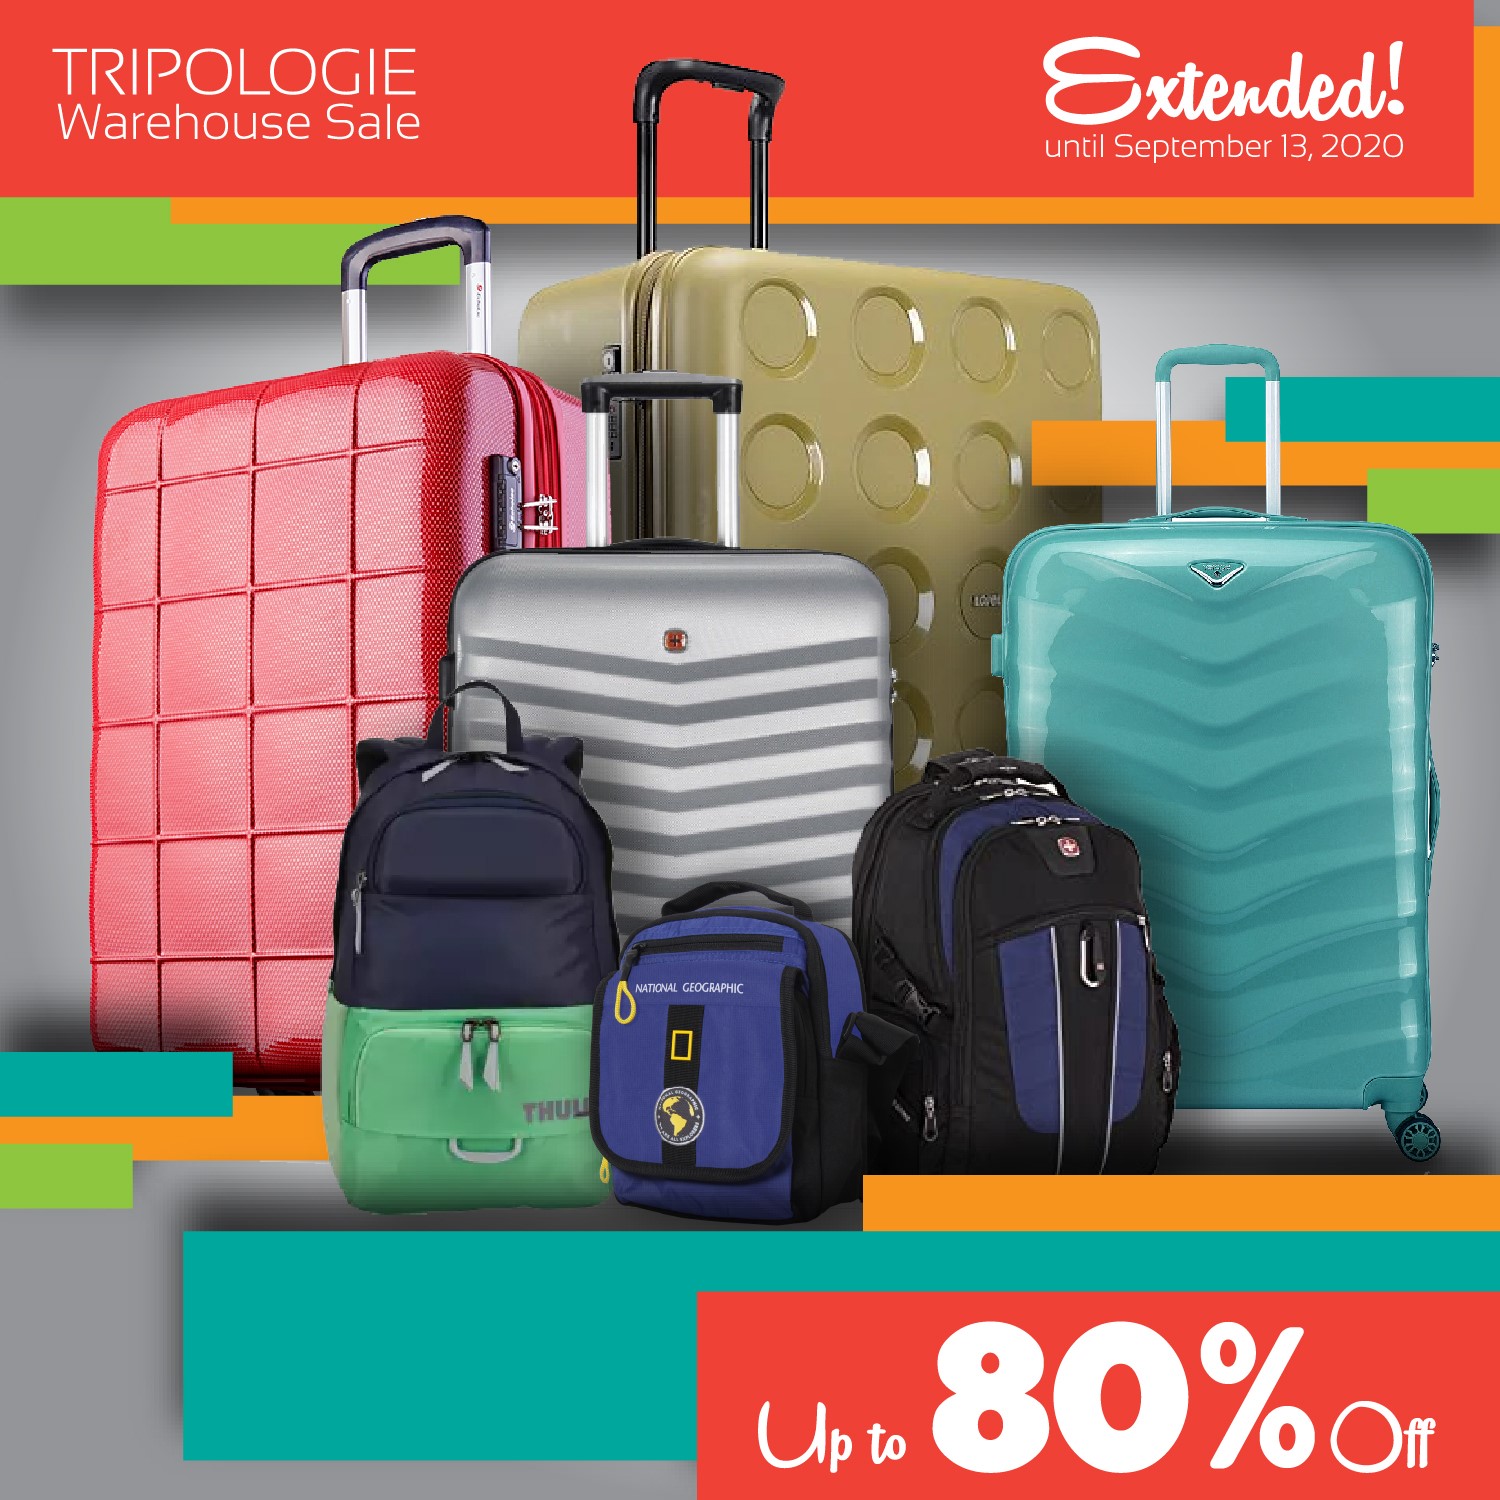 Eastwood Travel Gear Warehouse Sale by Tripologie (extended)